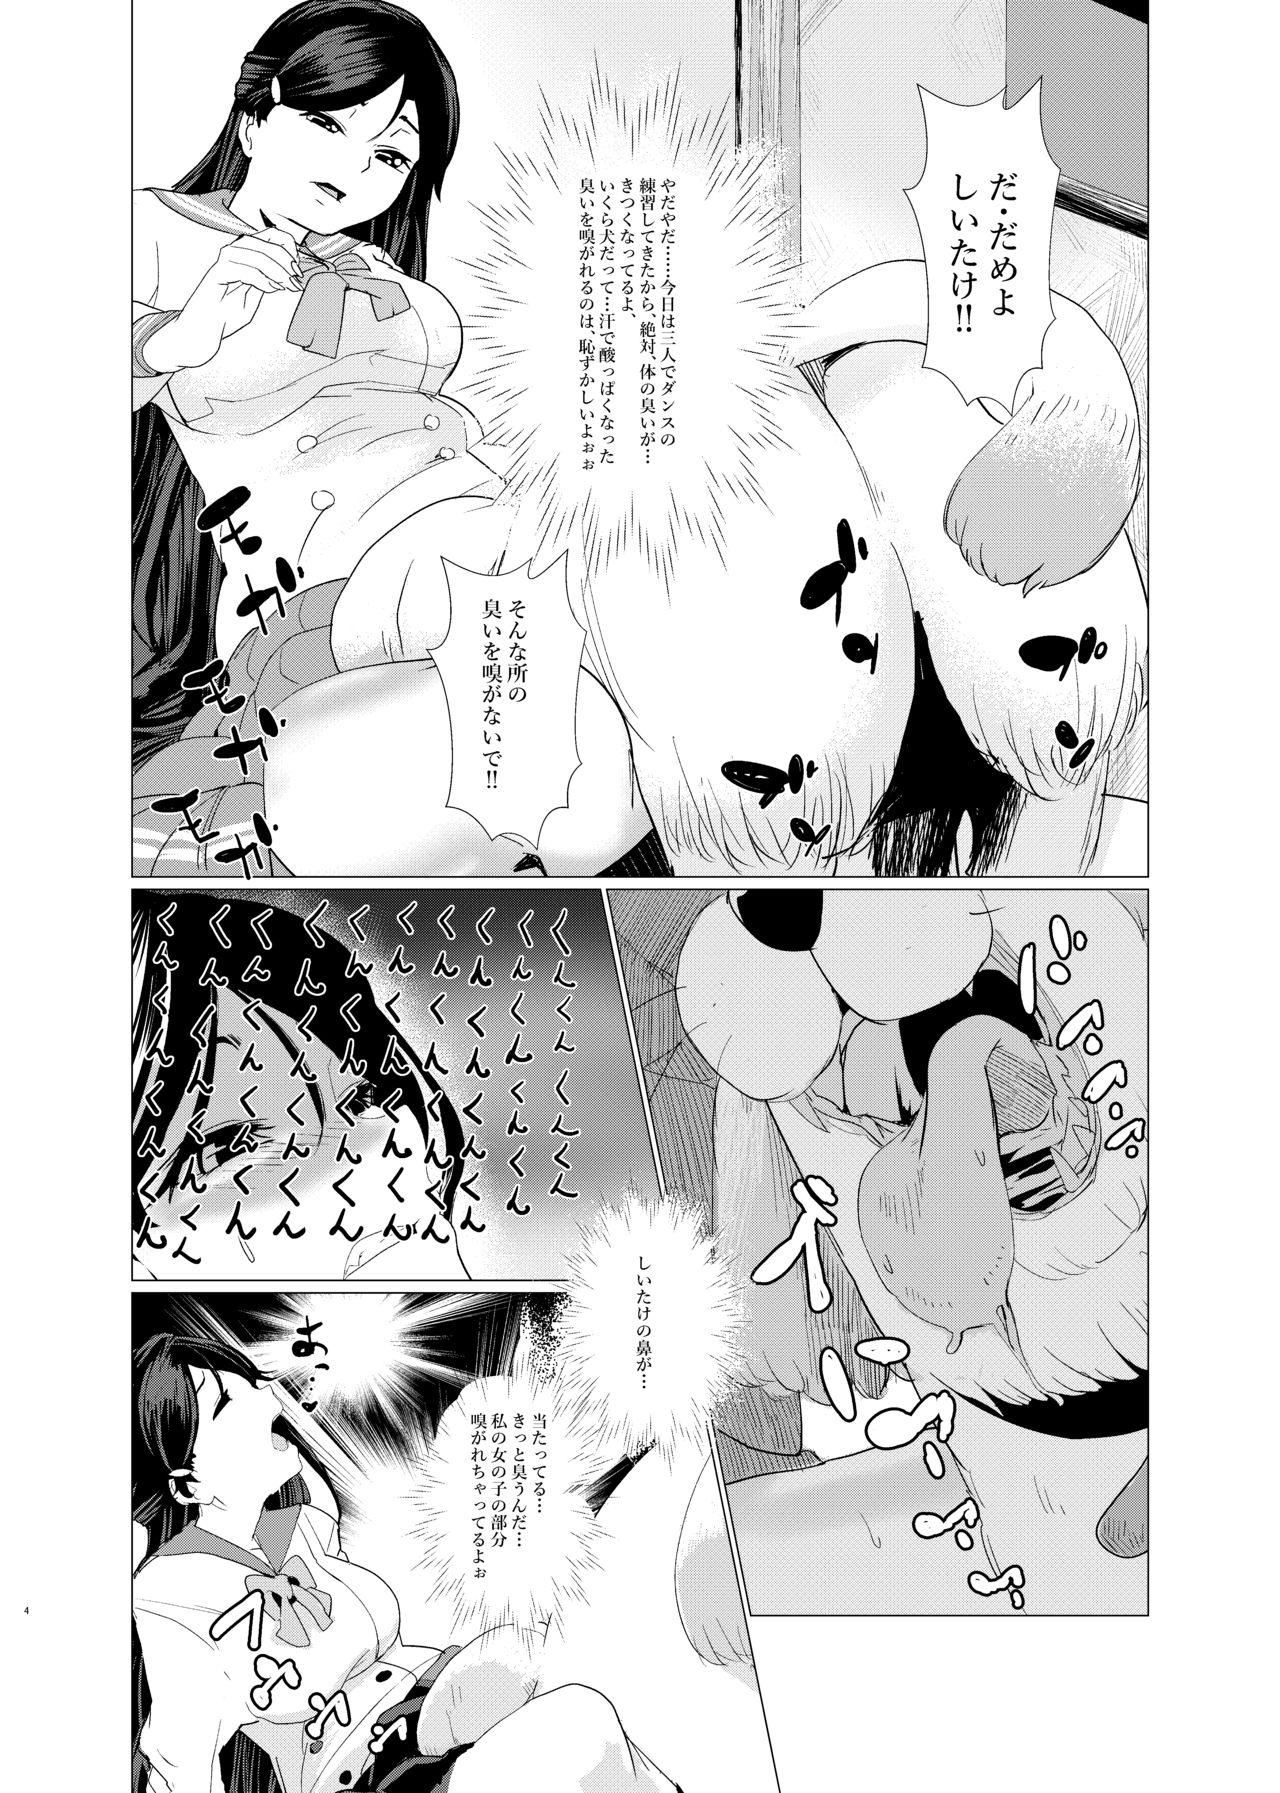 Mexico Star Guard Dog - Love live Twerking - Page 6